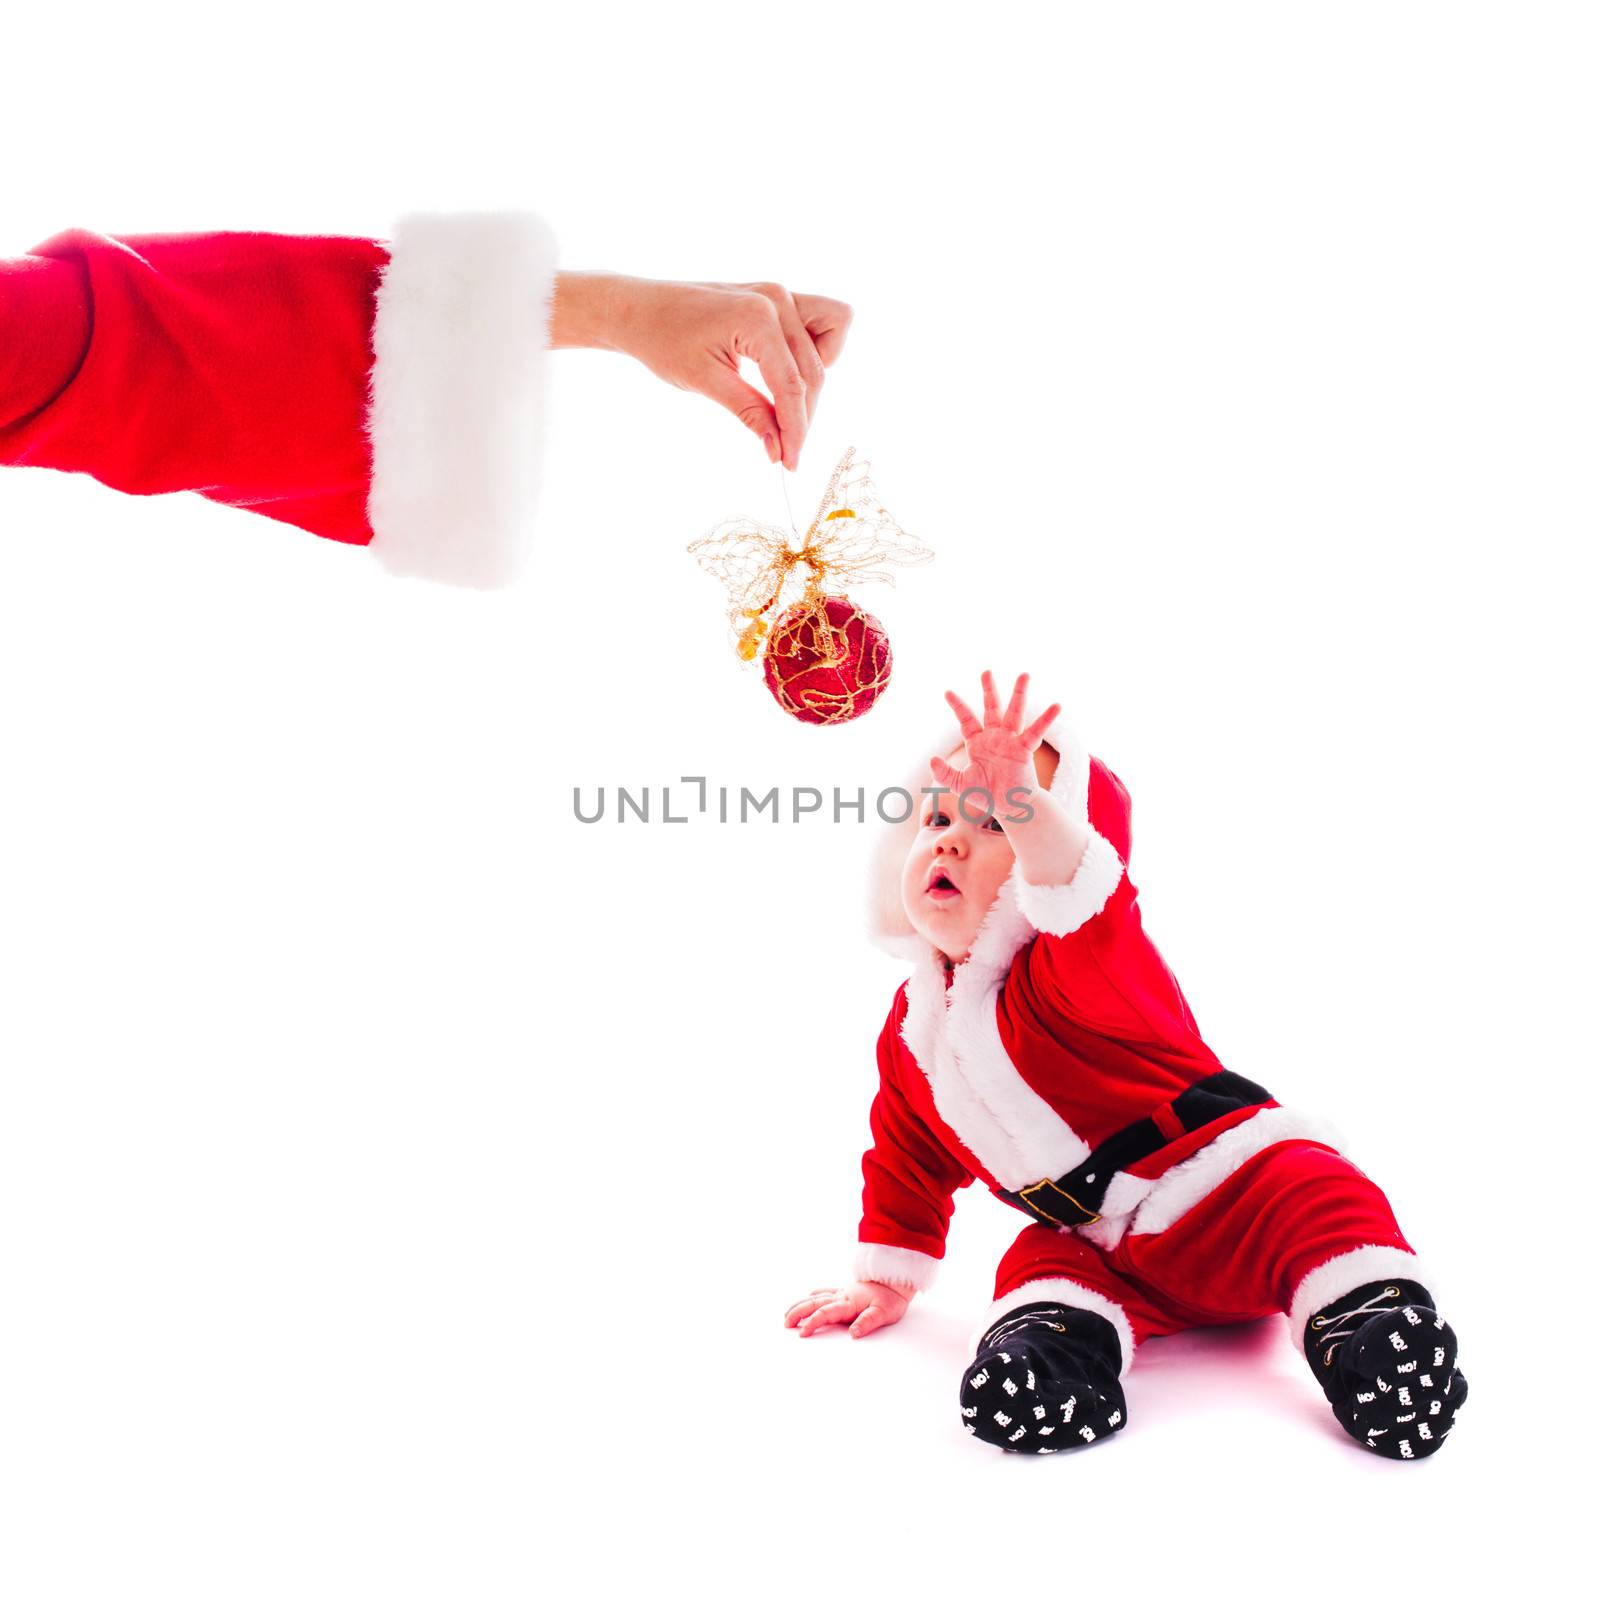 Little Santa boy wants to play isolated on white background